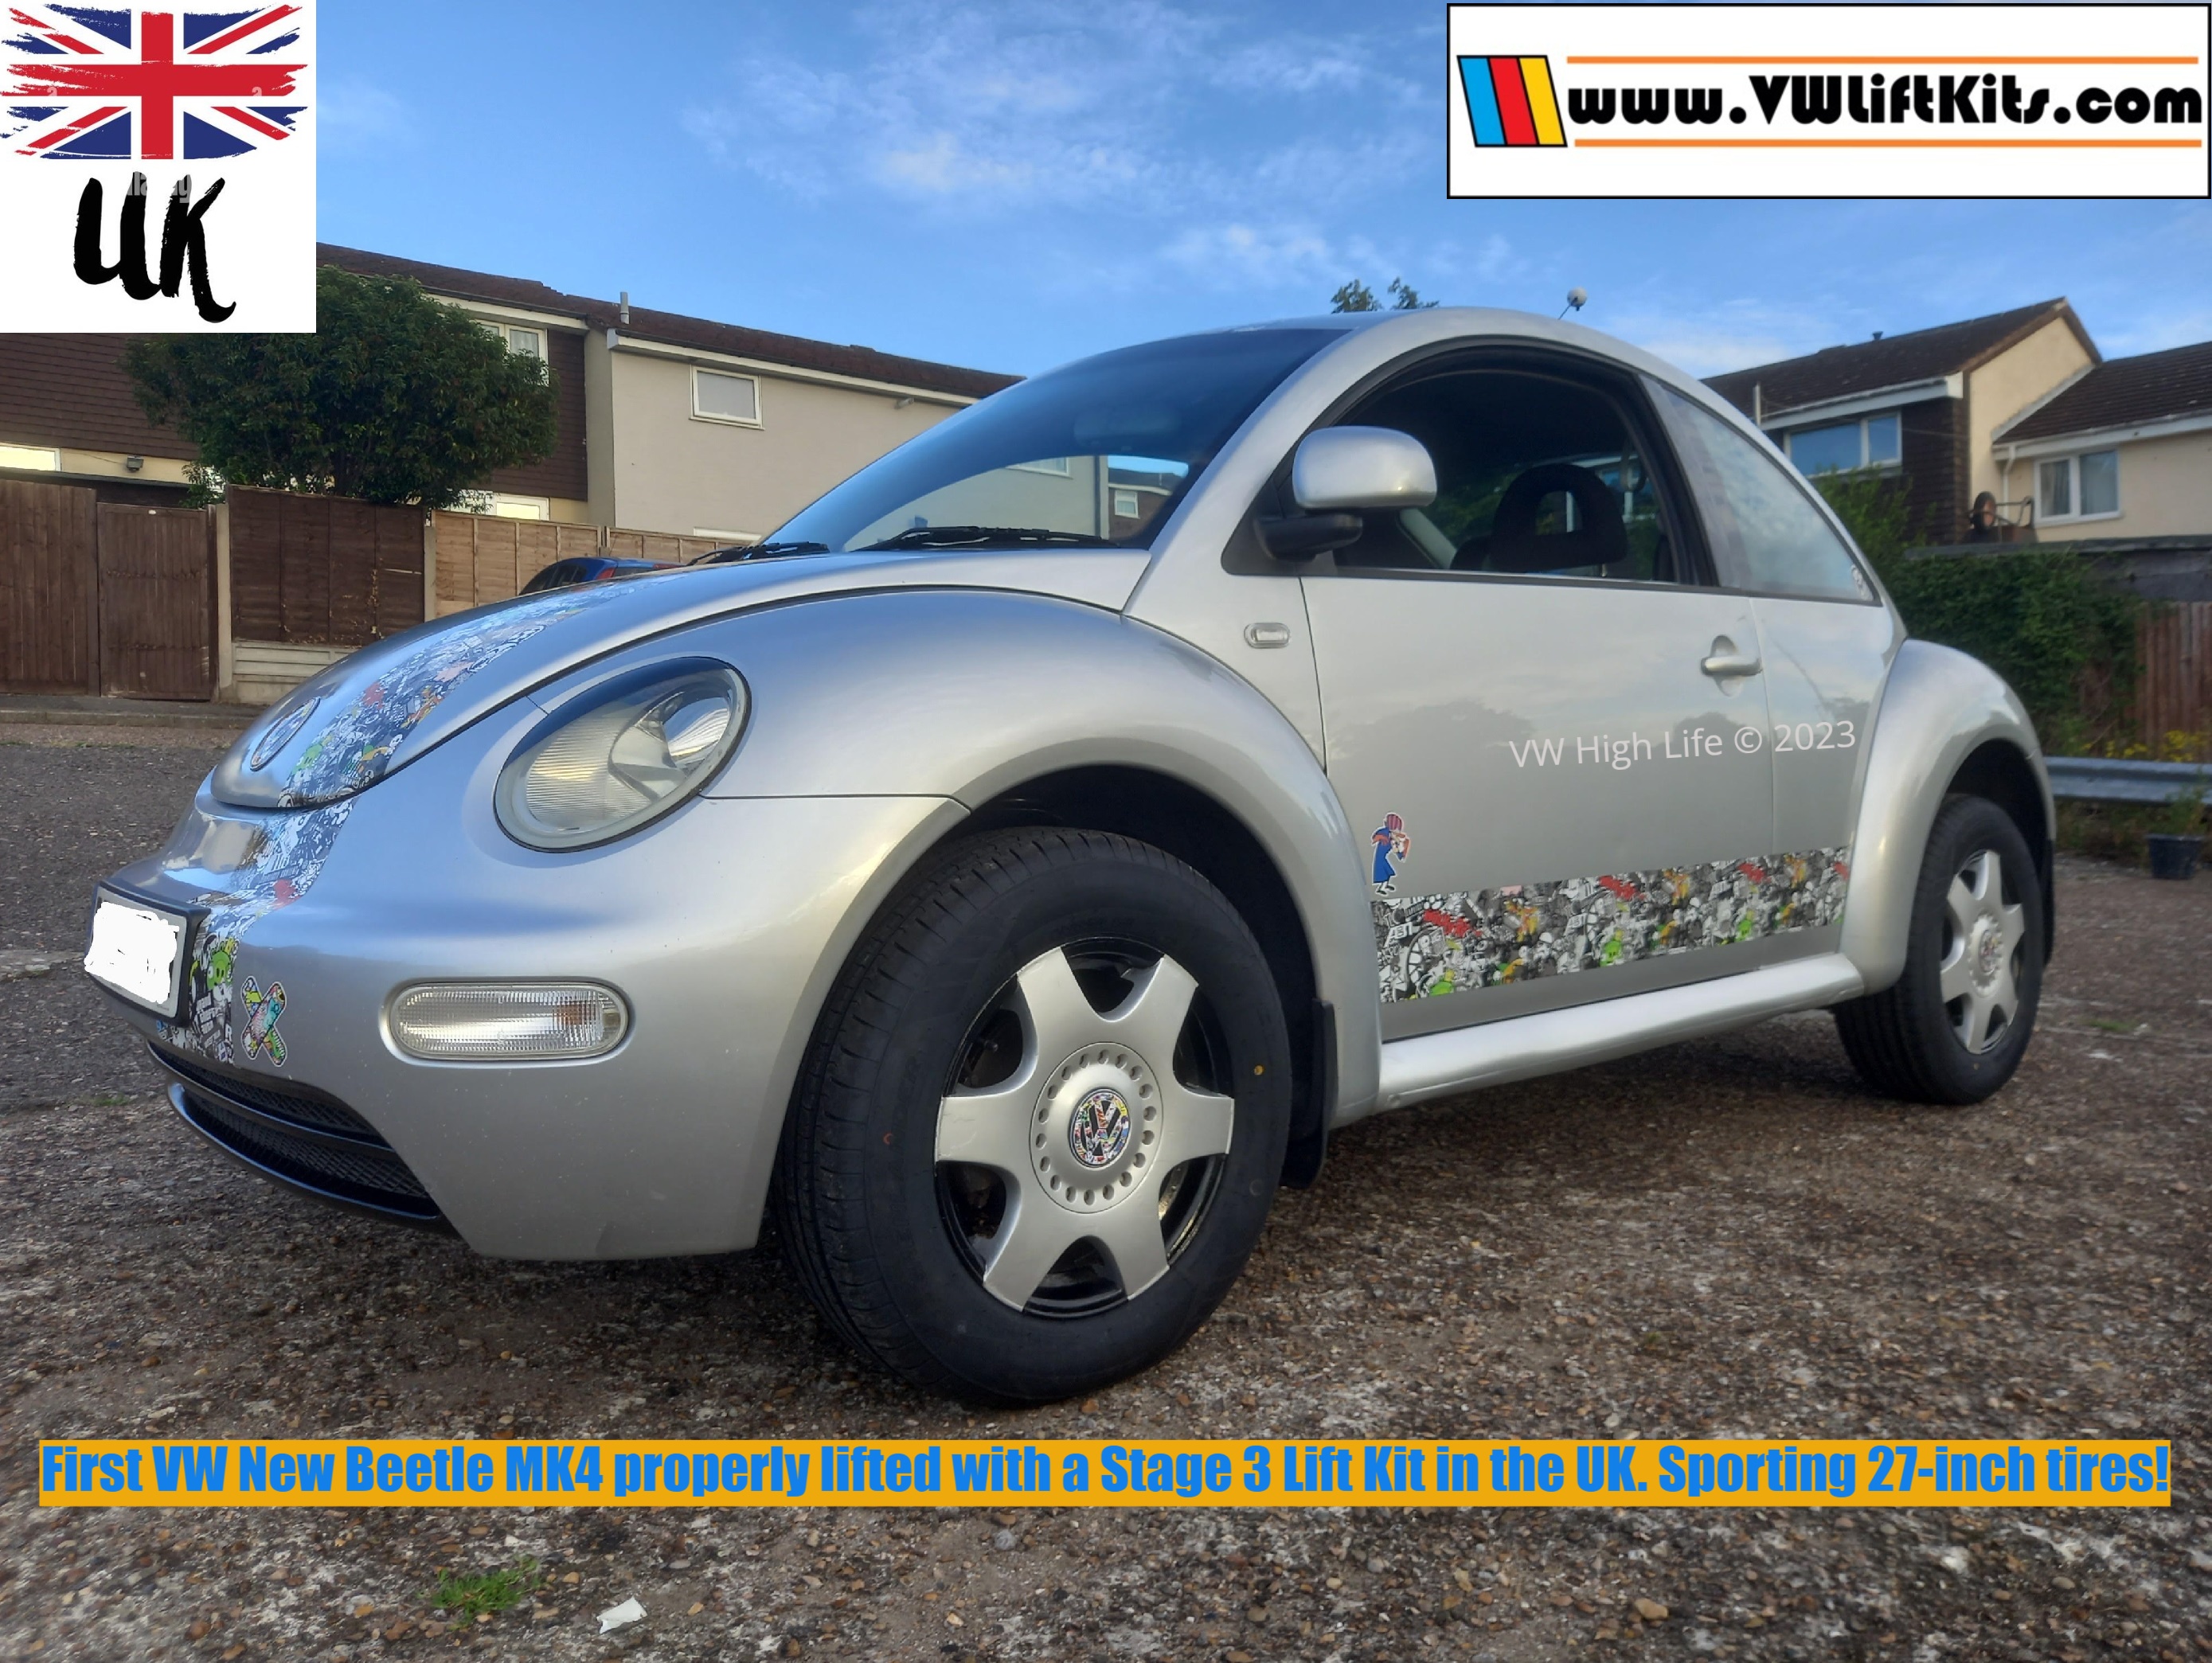 Congrats to Martin for properly lifting his wife's Beetle with a Stage 3 Kit.